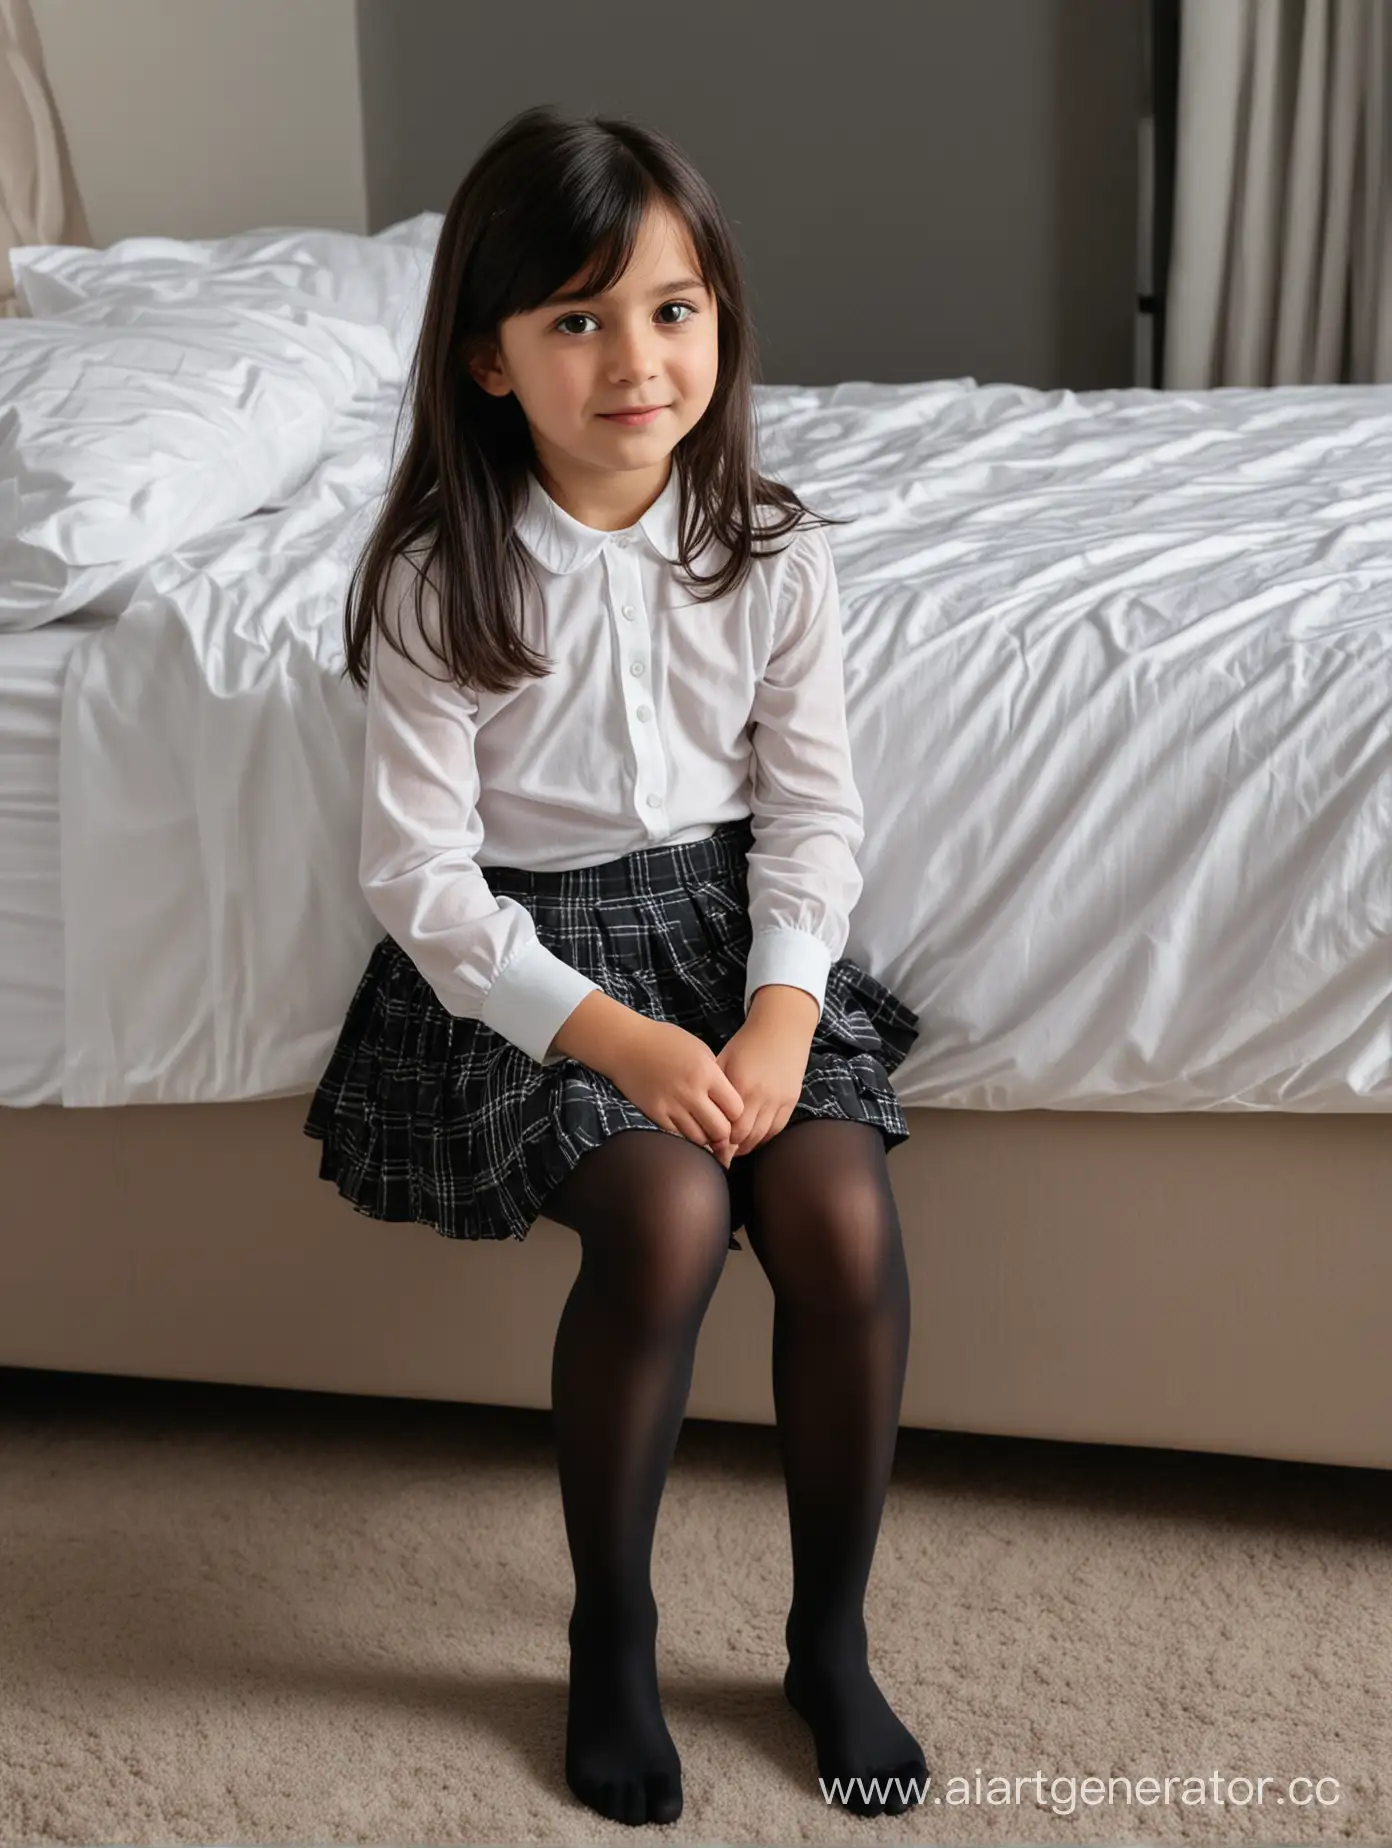 A little girl, 10 years old, pattetned pleated skirt, black very opaque  pantyhose. Dark hair. Bedroom. Close up shot. From the under. Turkish. Sits the bed's side. Small feets.